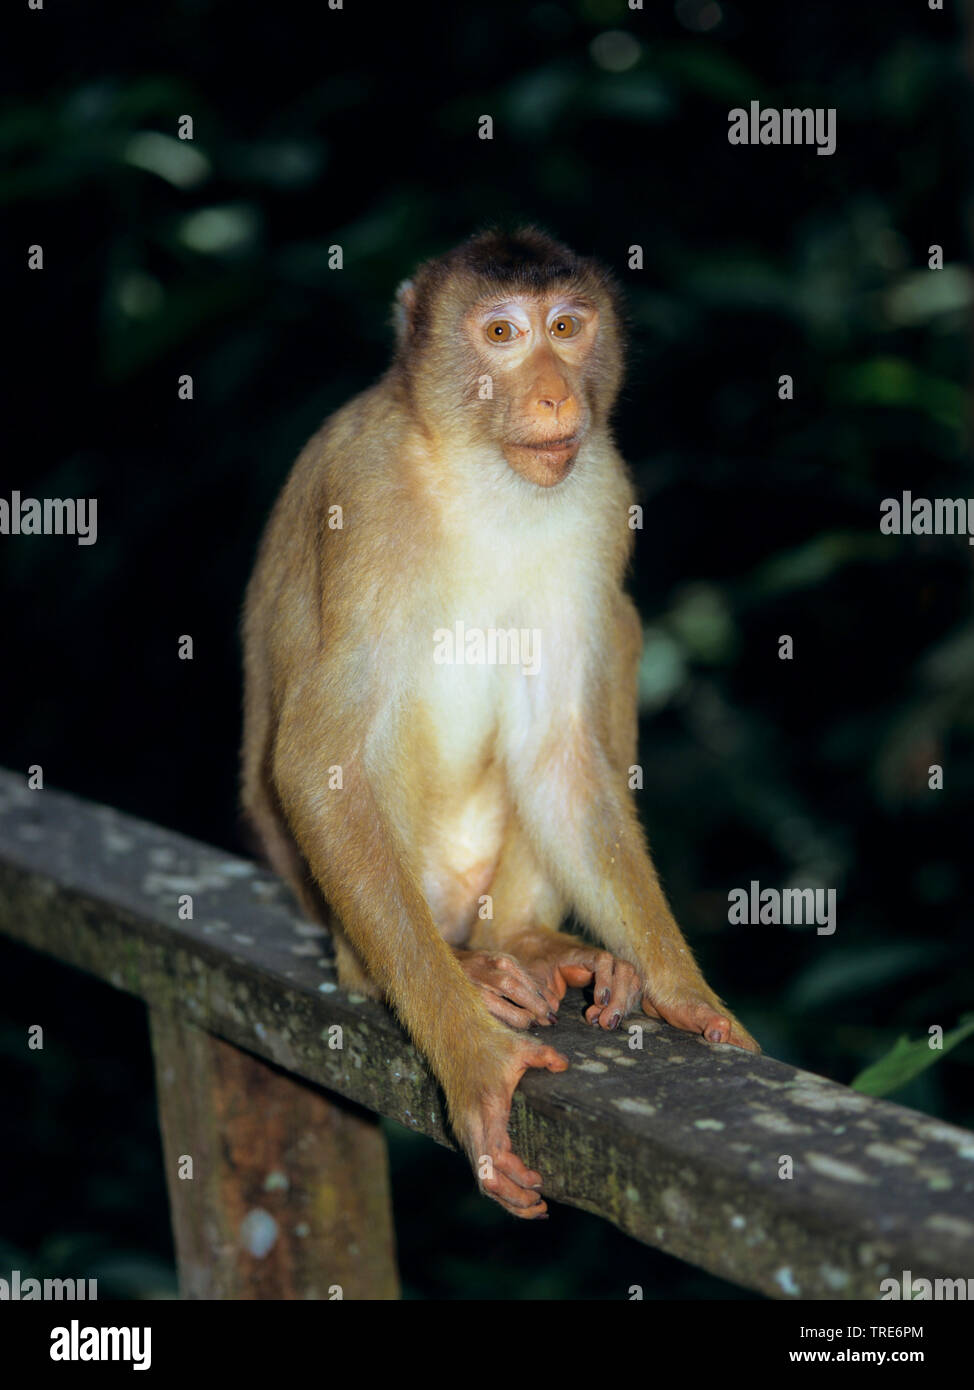 pigtail macaque (Macaca nemestrina), sits on a railing Stock Photo